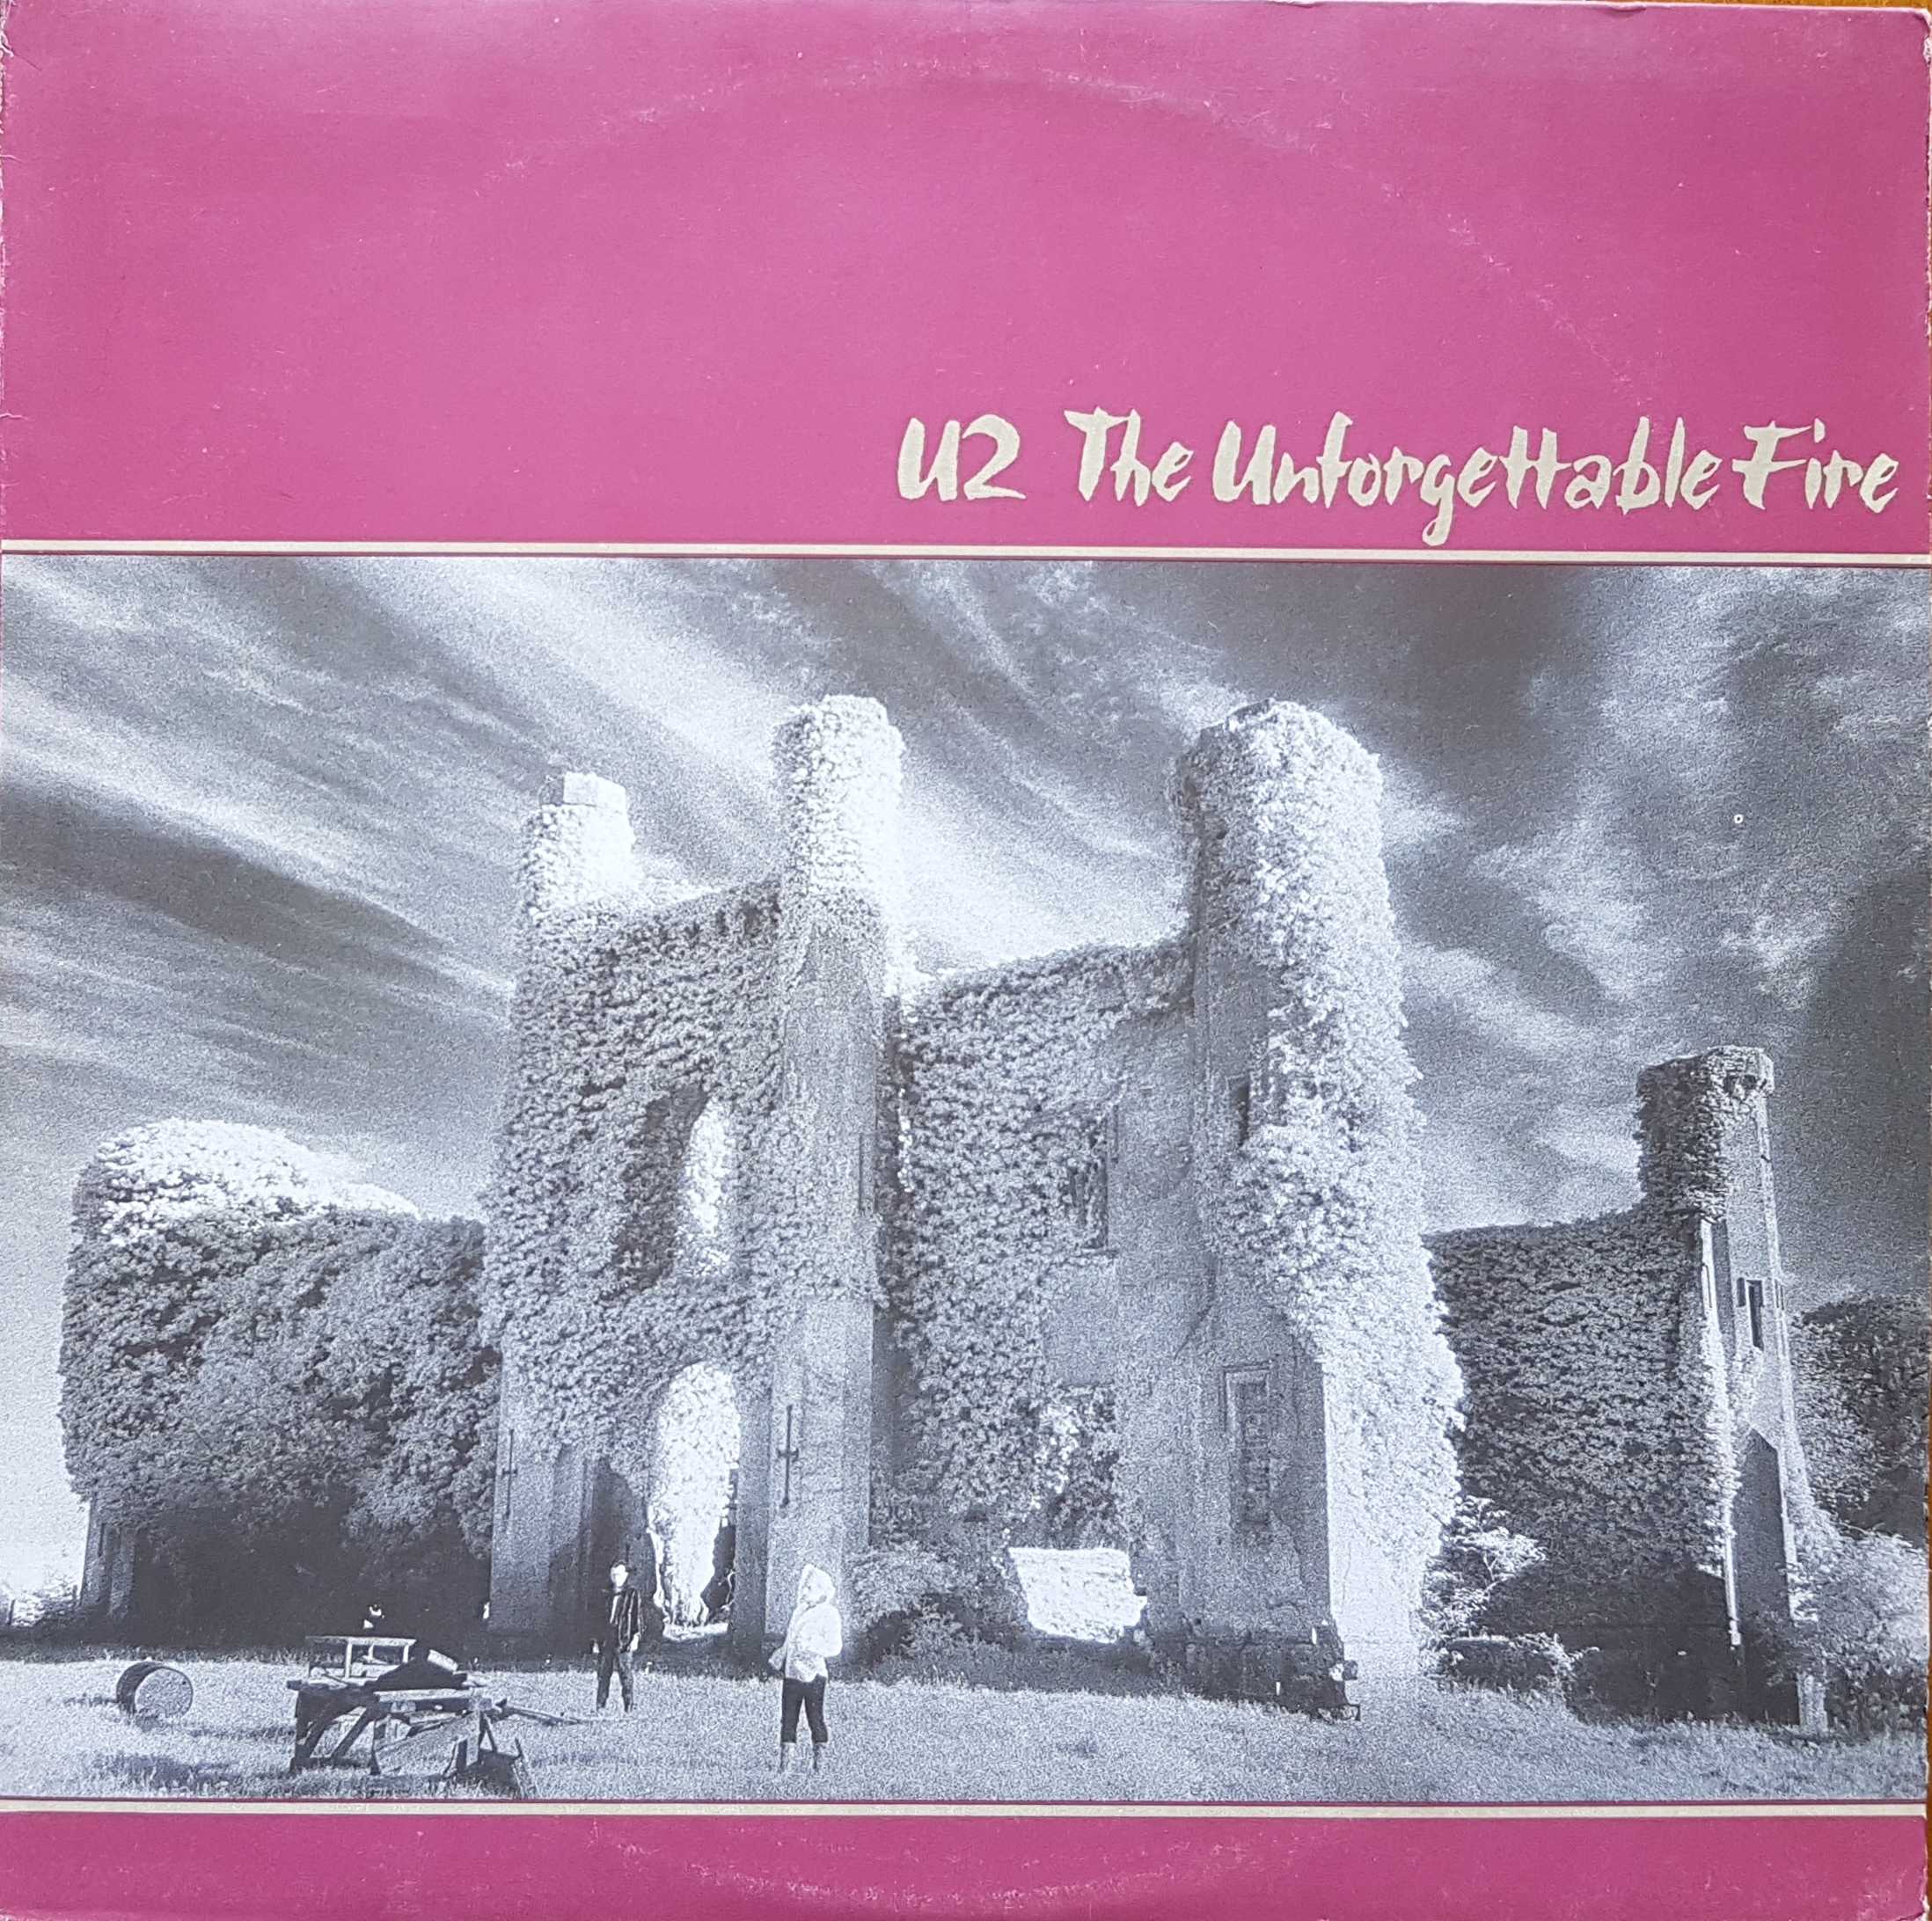 Picture of U 25 The unforgettable fire by artist U2 